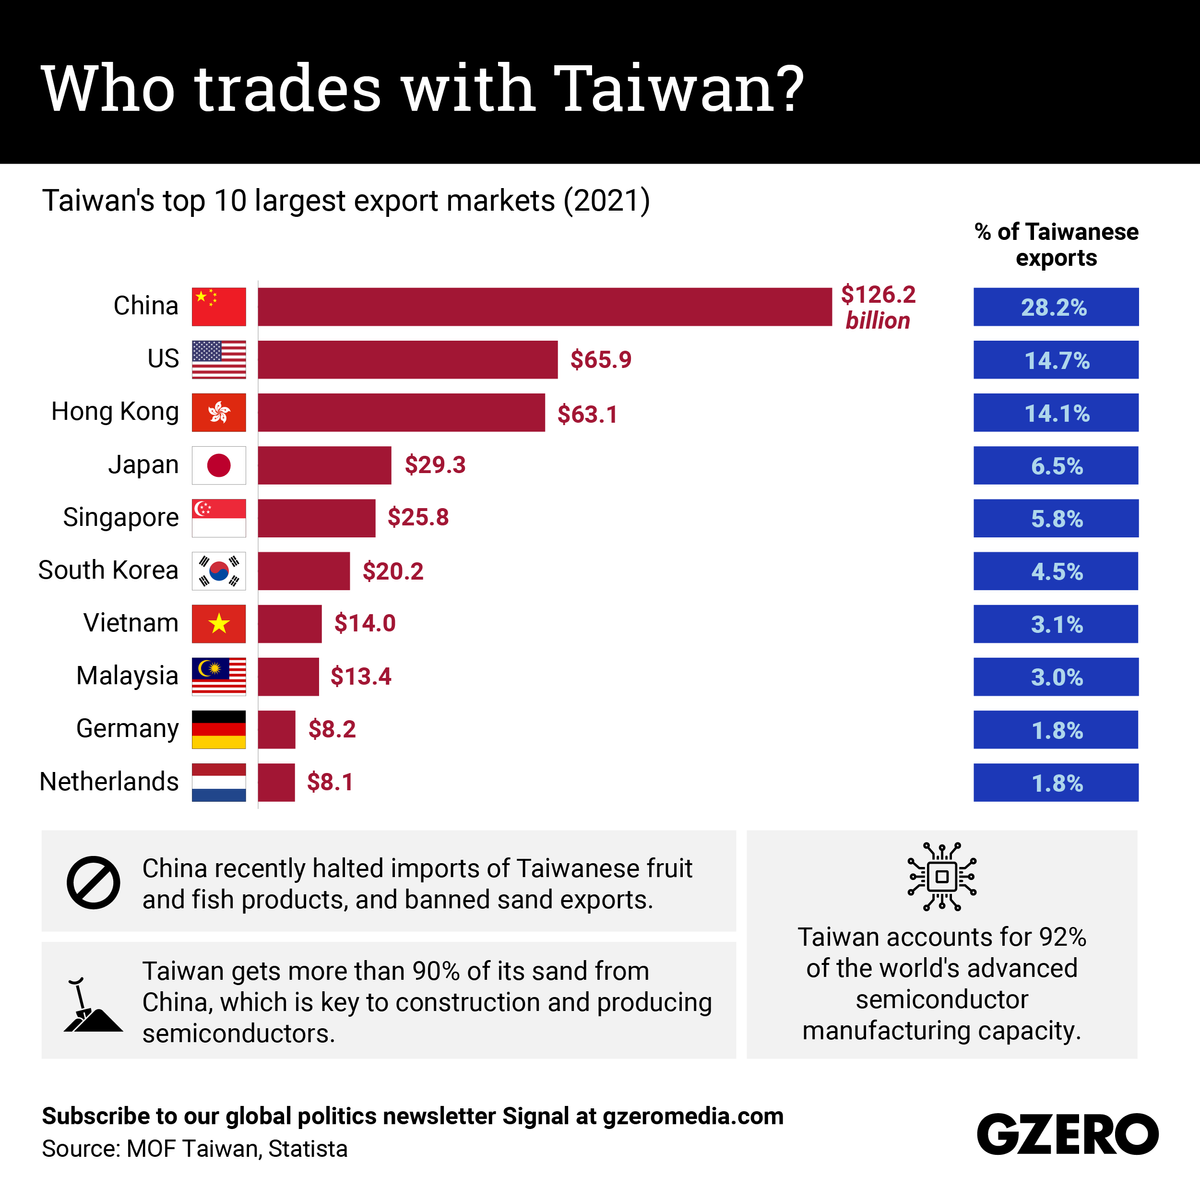 The Graphic Truth: Who trades with Taiwan?